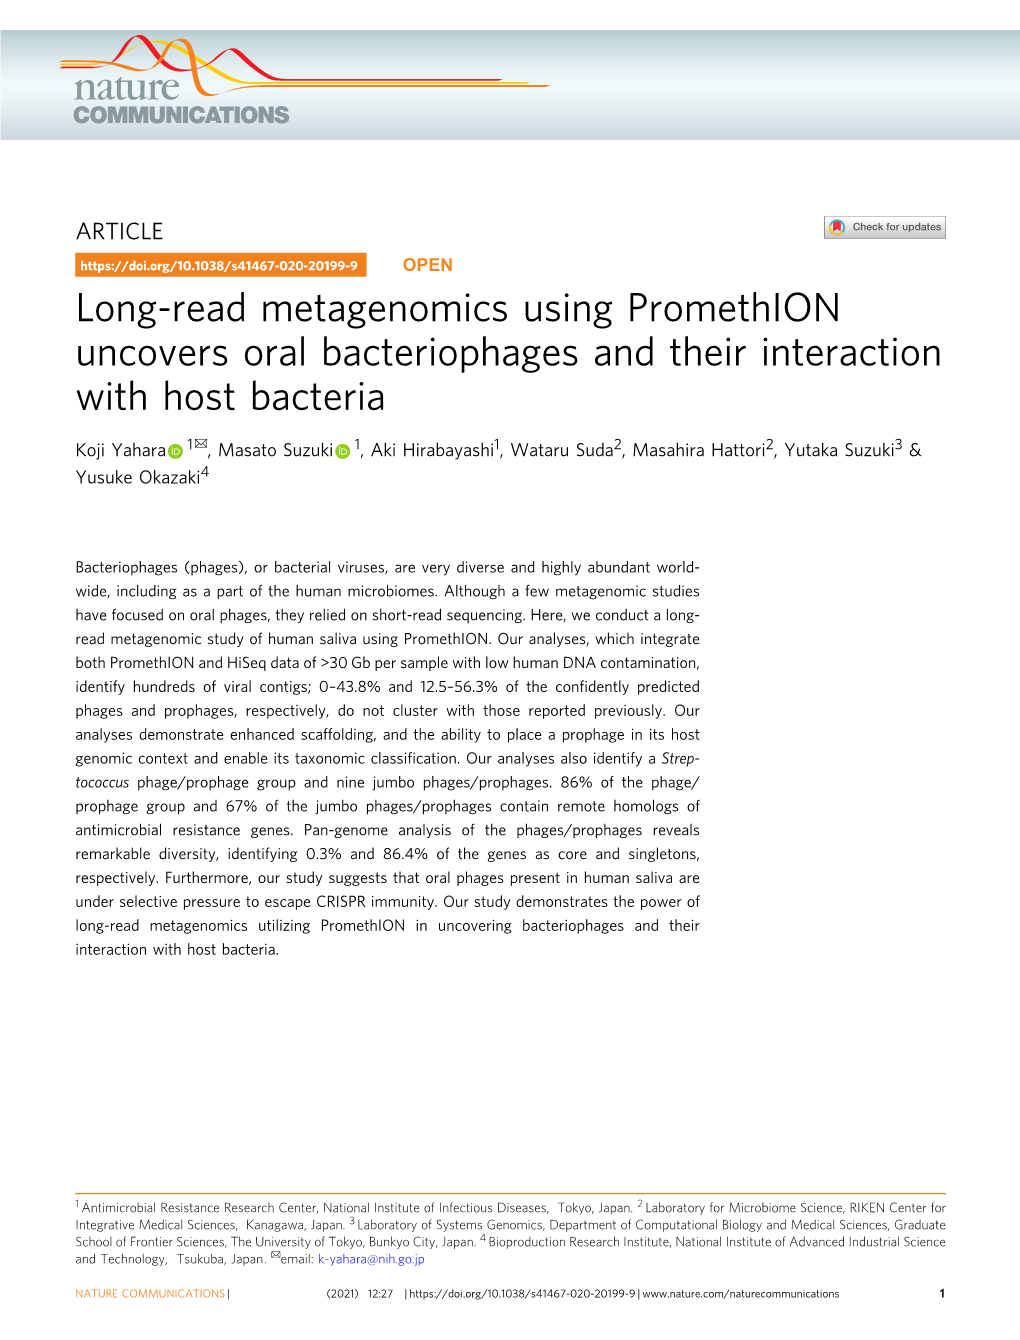 Long-Read Metagenomics Using Promethion Uncovers Oral Bacteriophages and Their Interaction with Host Bacteria